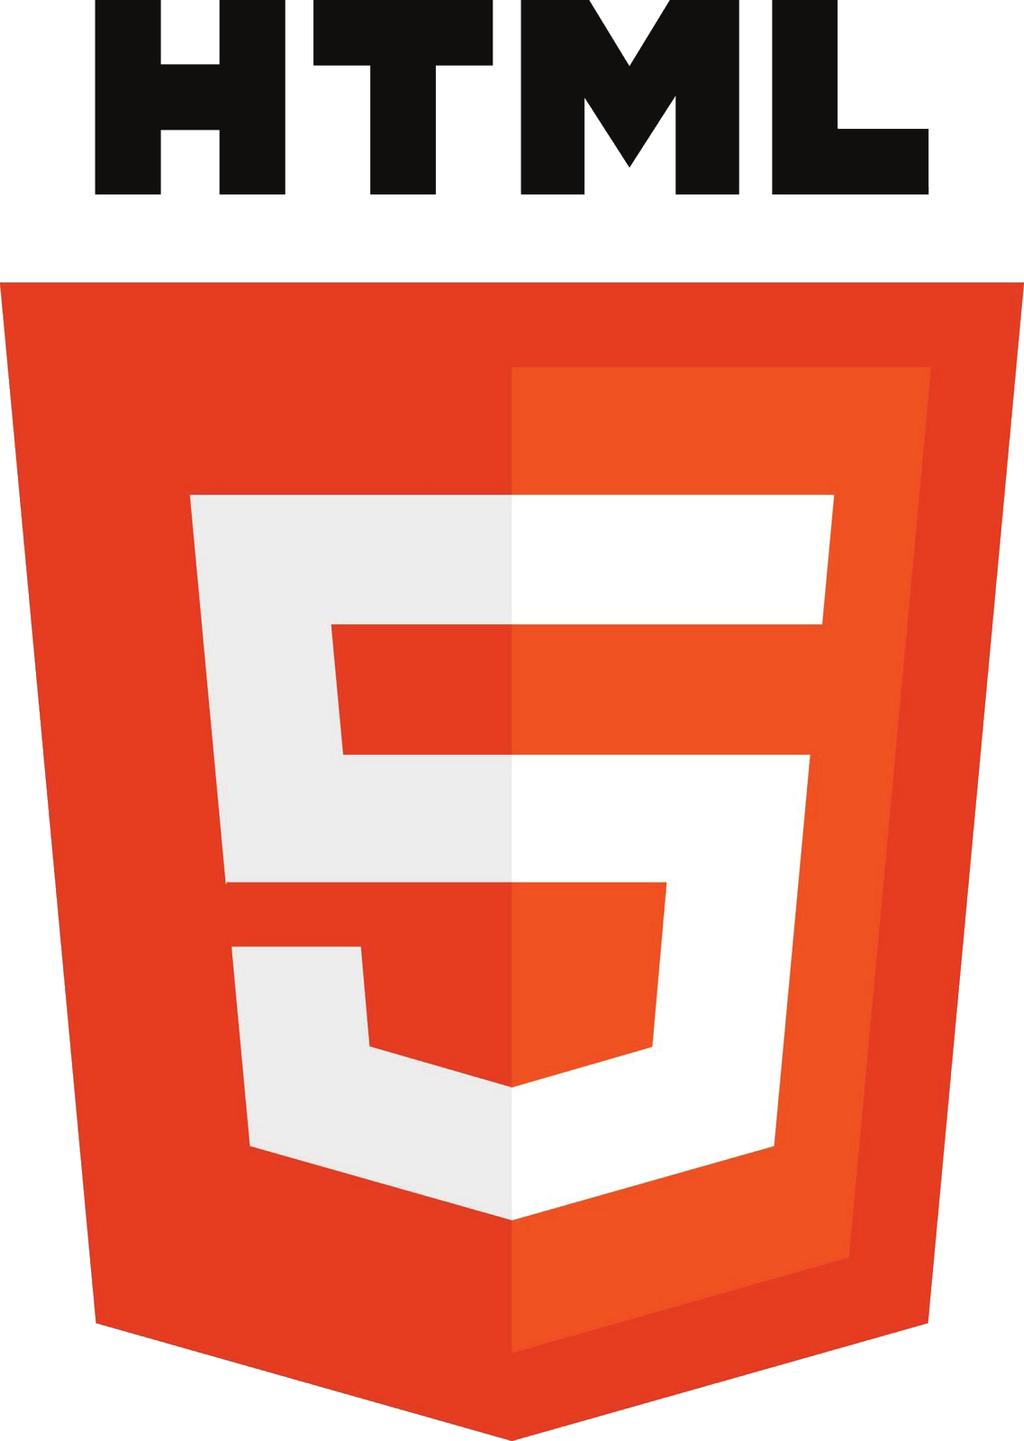 WHAT IS HTML5? HTML5 is being developed as the next major revision of HTML.This code can now be used for new functions that can benefit developers and Internet users.